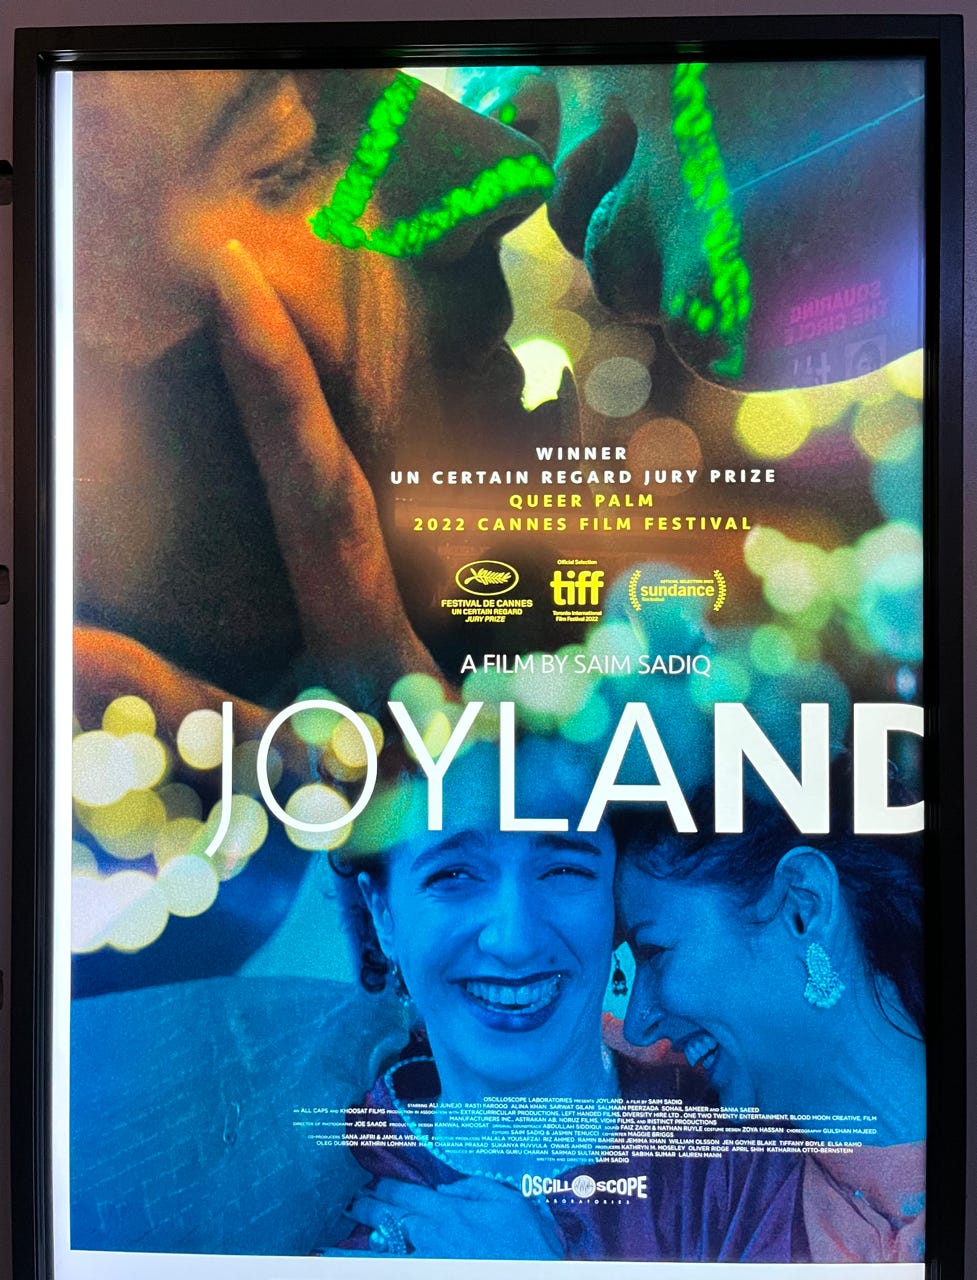 Joyland movie poster. At the top, a close-up of two faces about to kiss. At the bottom, two women laugh together.